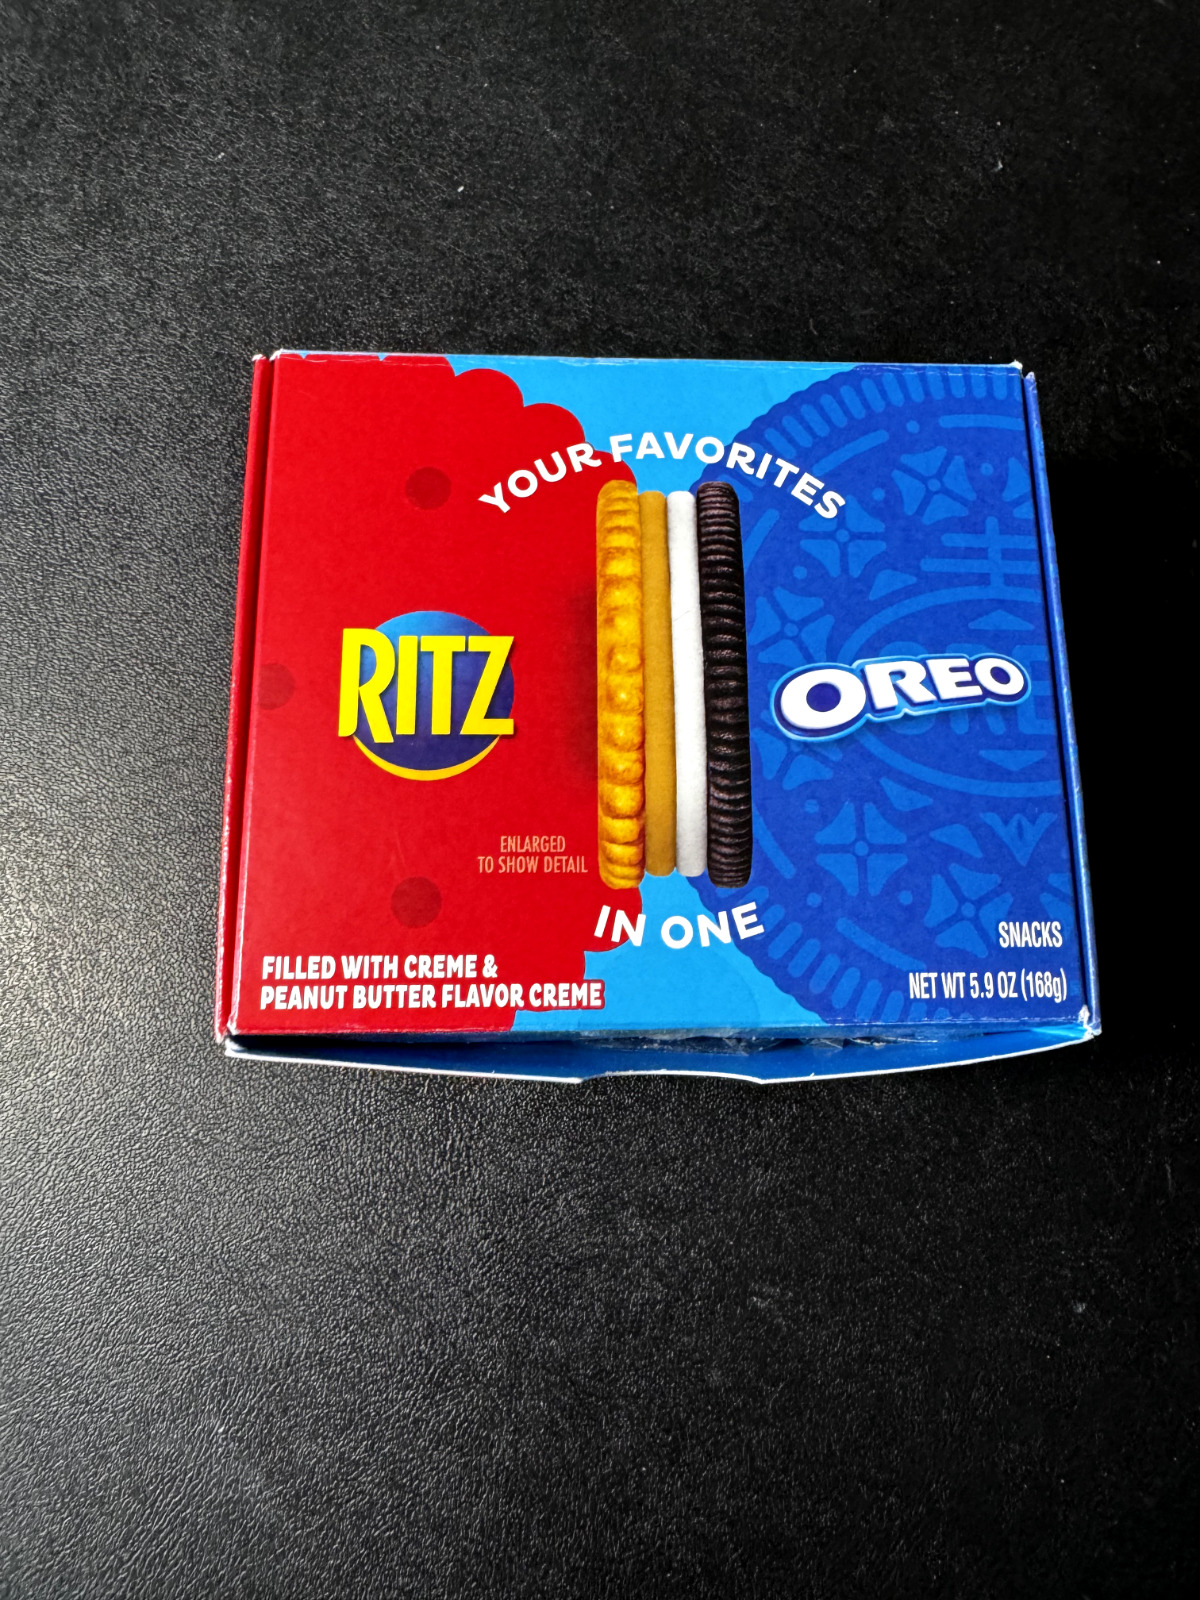 Ritz Oreo Limited Edition Cookies Box 1/1000 - NEW and Sealed